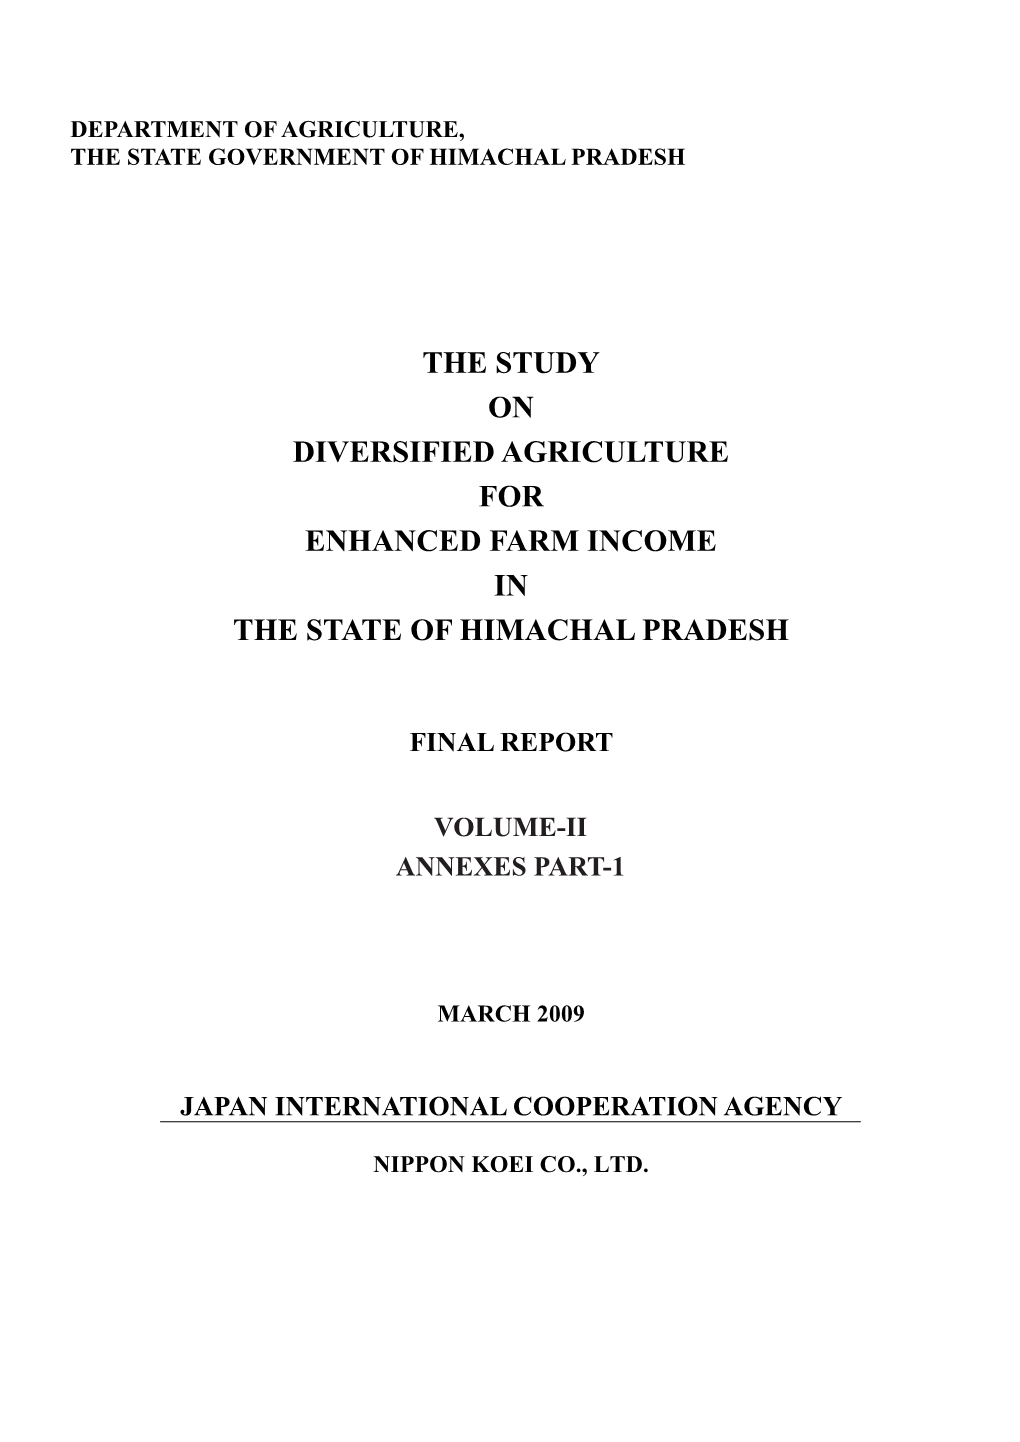 The Study on Diversified Agriculture for Enhanced Farm Income in the State of Himachal Pradesh